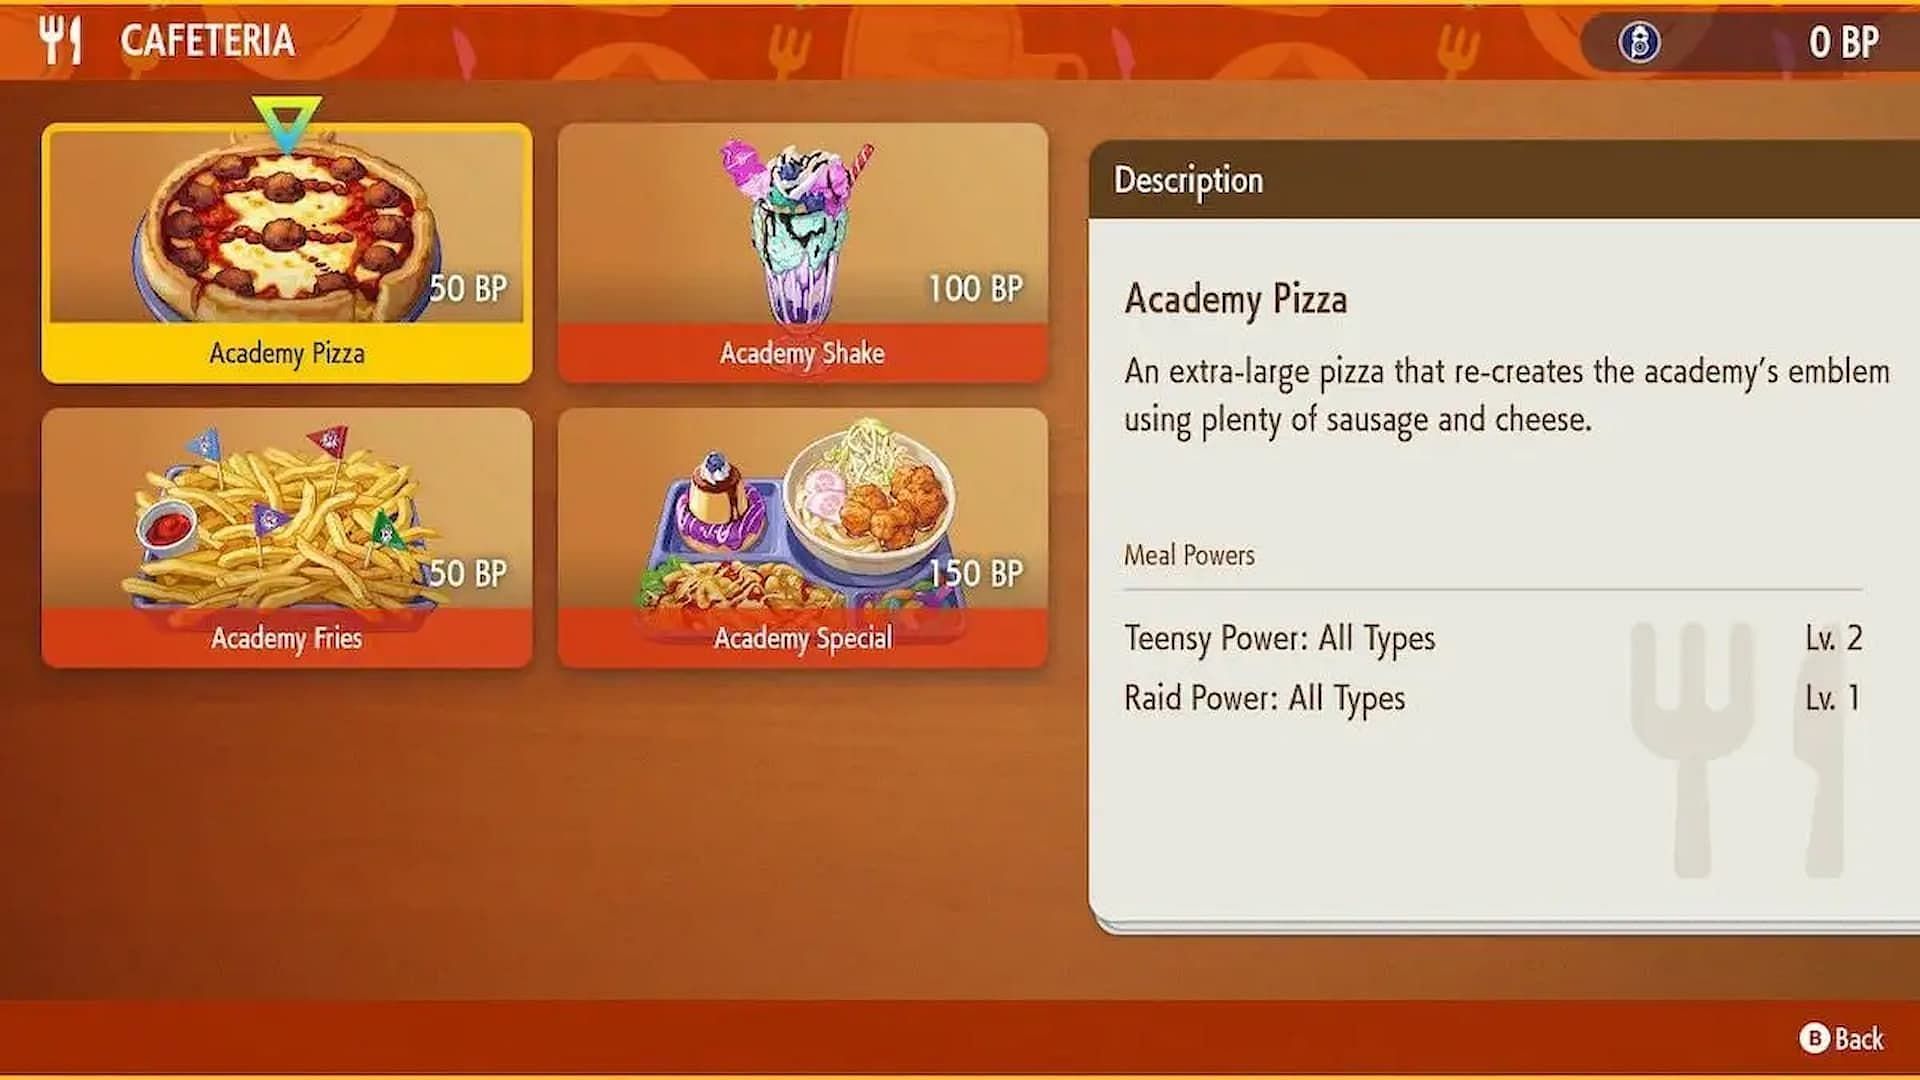 You can purchase Academy Pizza for 50 BP (Image via The Pokemon Company)